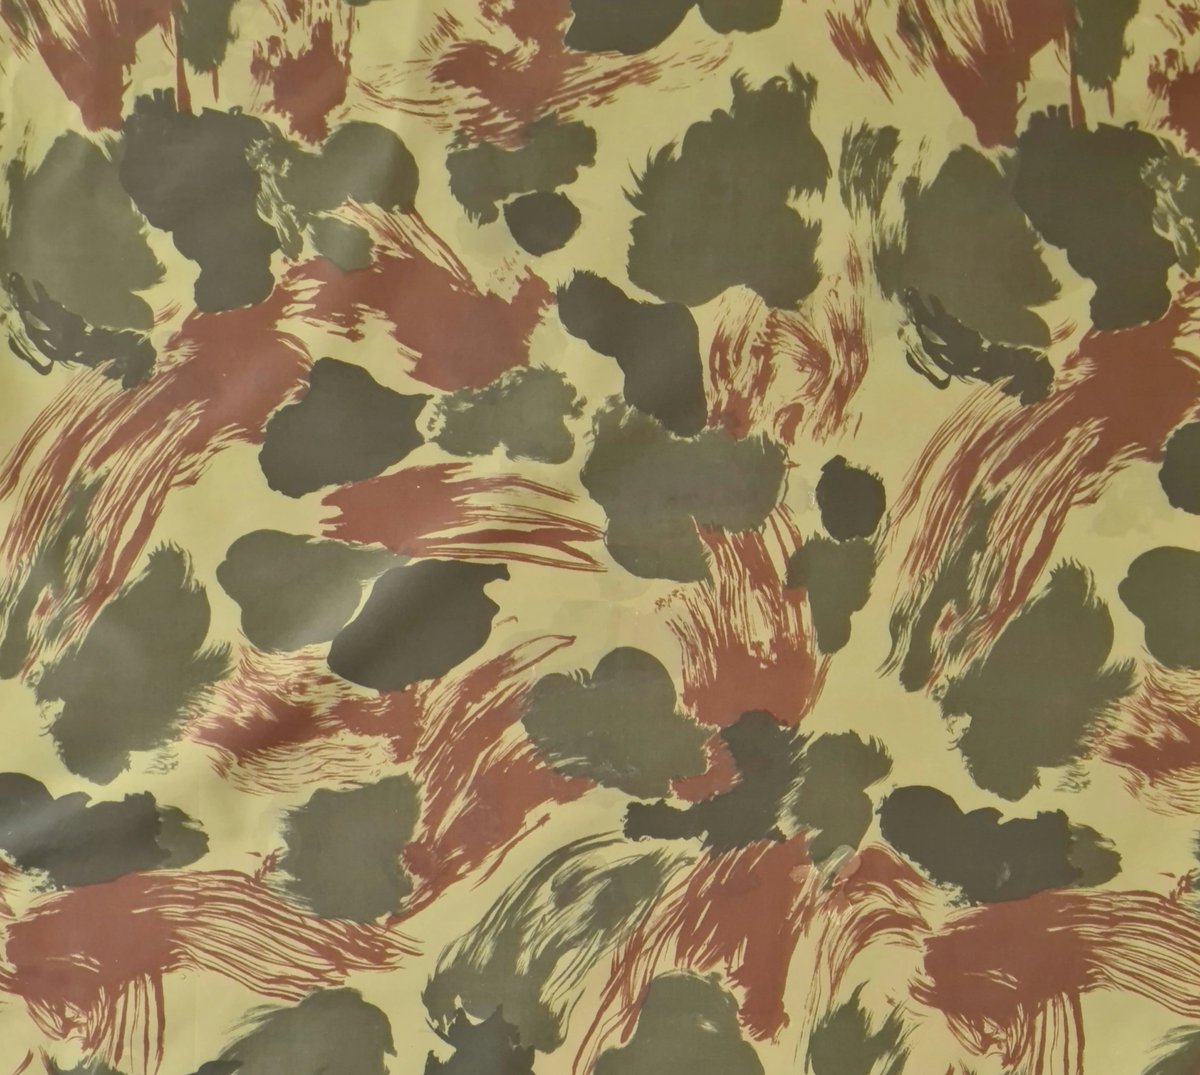 NZ Army Camouflage 1949-1979. The pattern was a unique blend of blotches and brushstrokes, featuring dark green and olive-green blotches, russet brushstrokes, and a lime green background. This design remained in use for over two decades. #ANZACmonth.